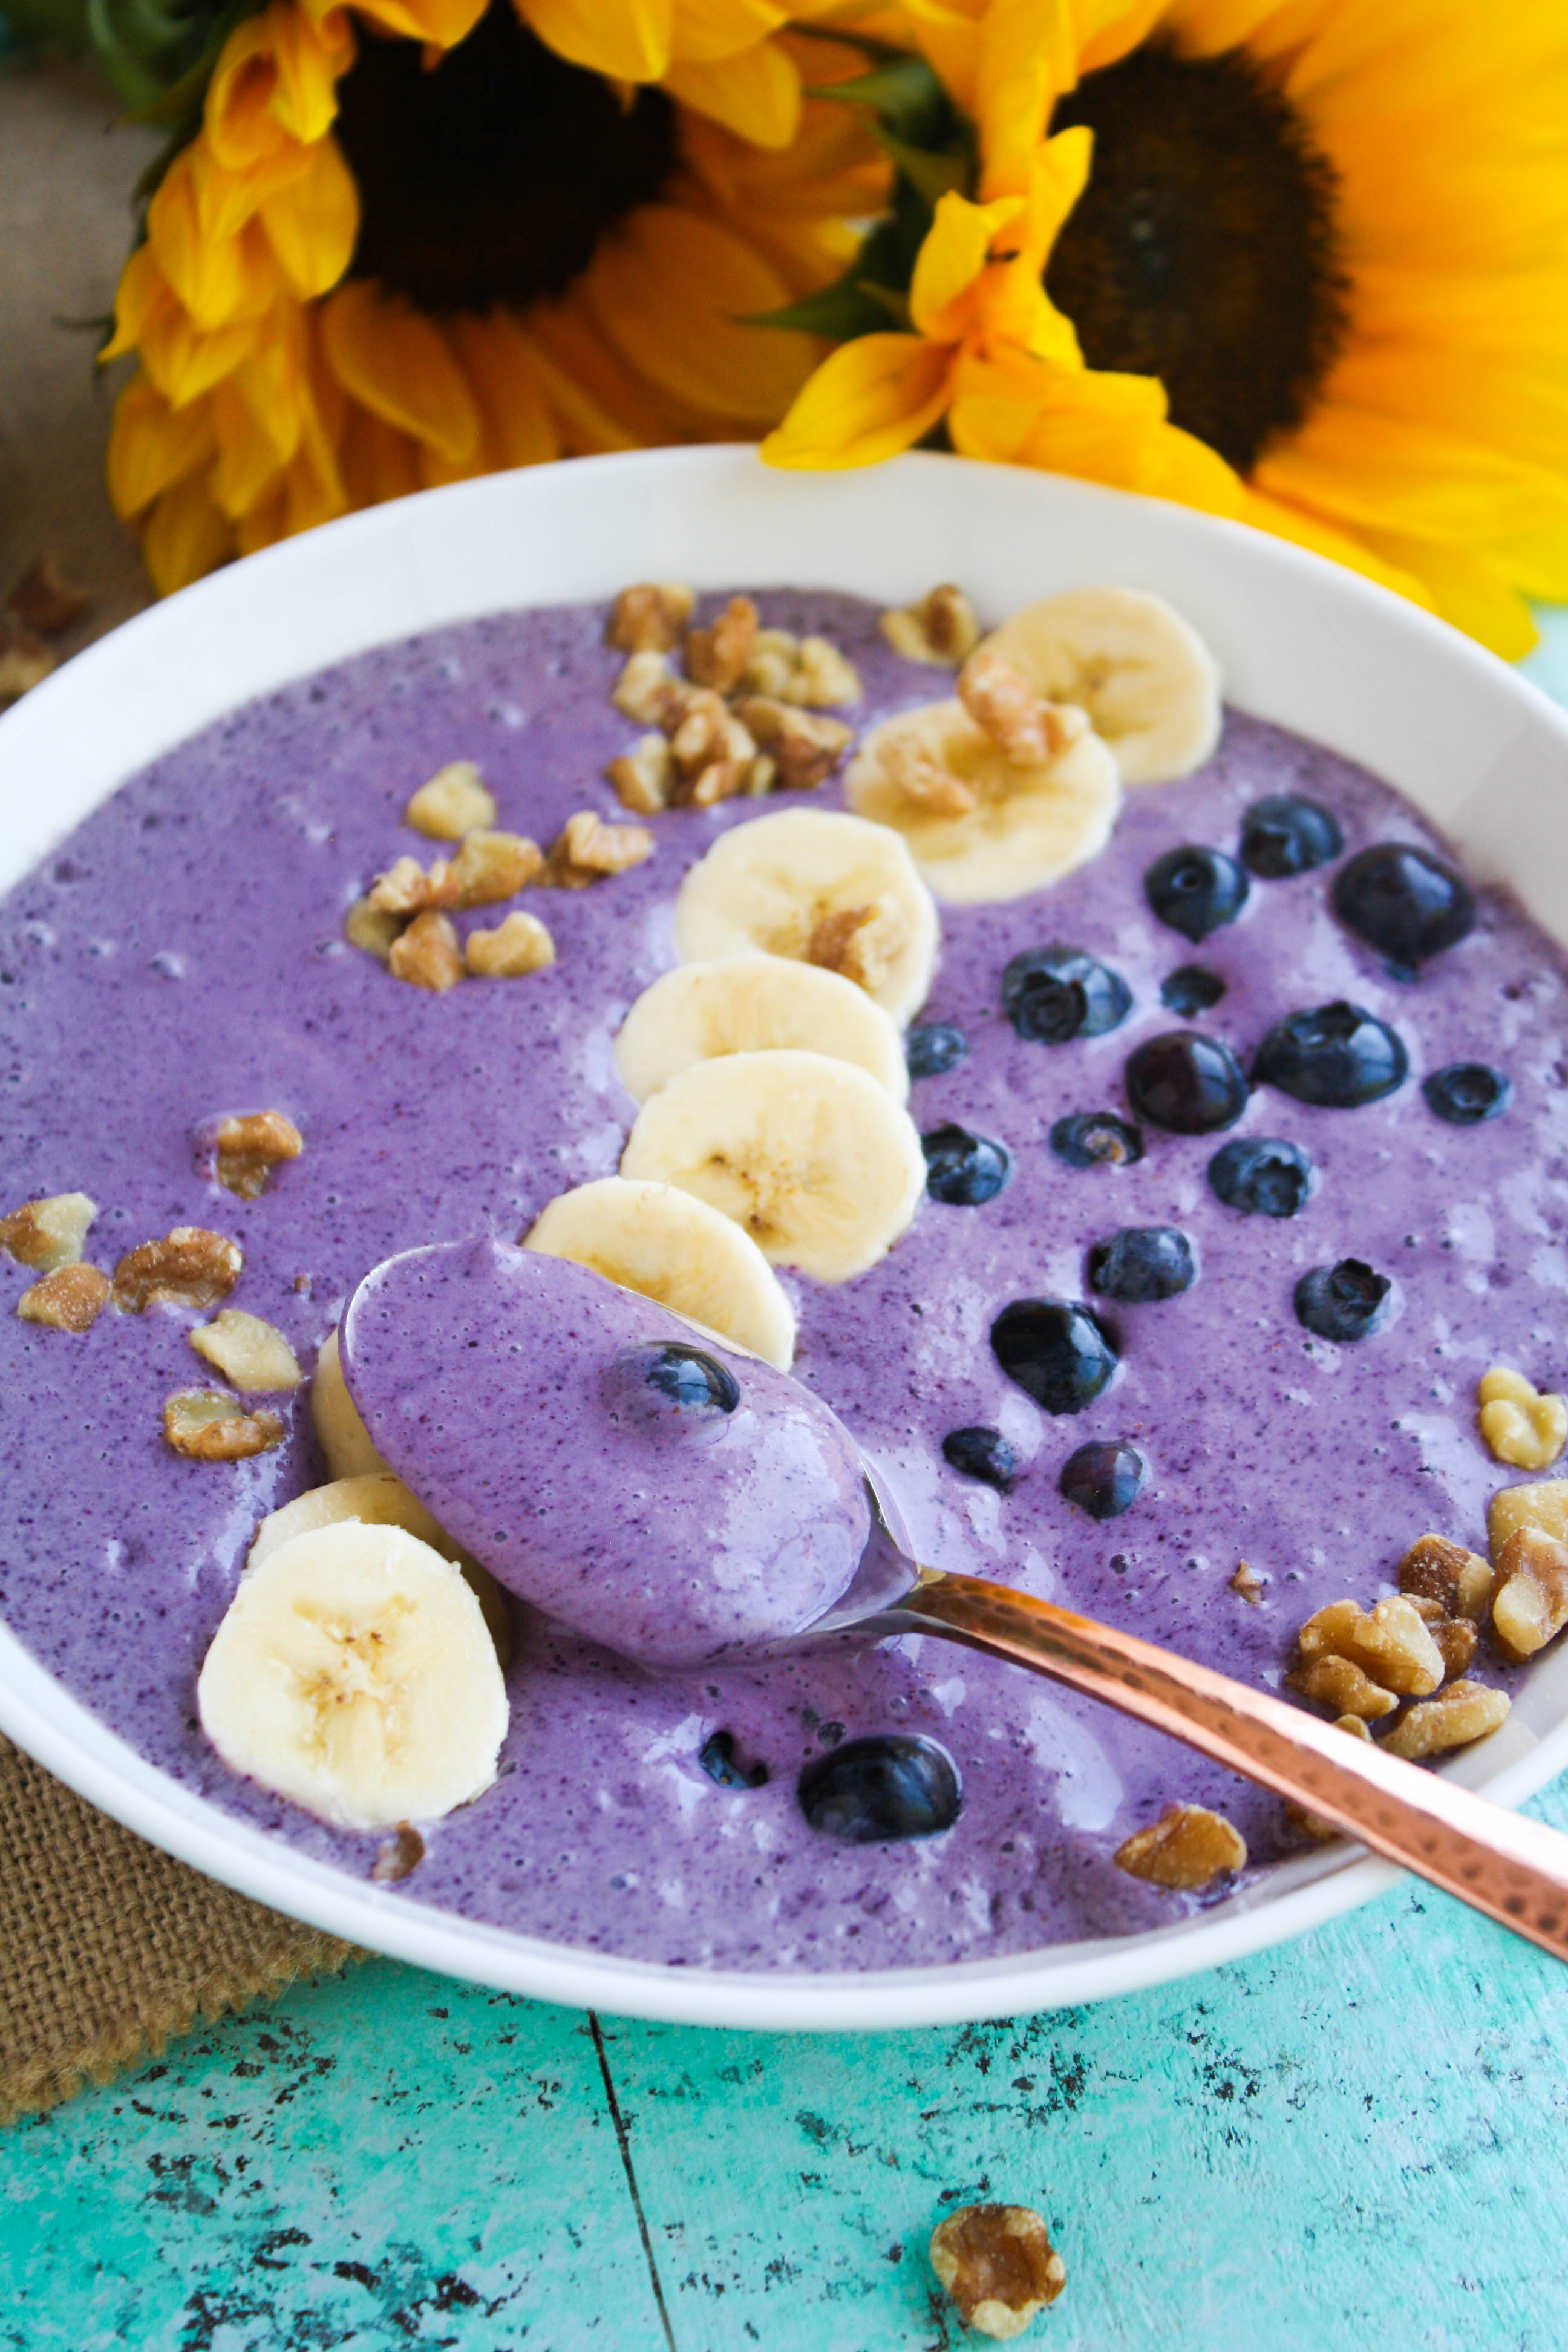 Blueberry Banana Walnut Smoothie Bowls are rich in color and lovely for breakfast! Blueberry Banana Walnut Smoothie Bowls are ideal for your morning meal.